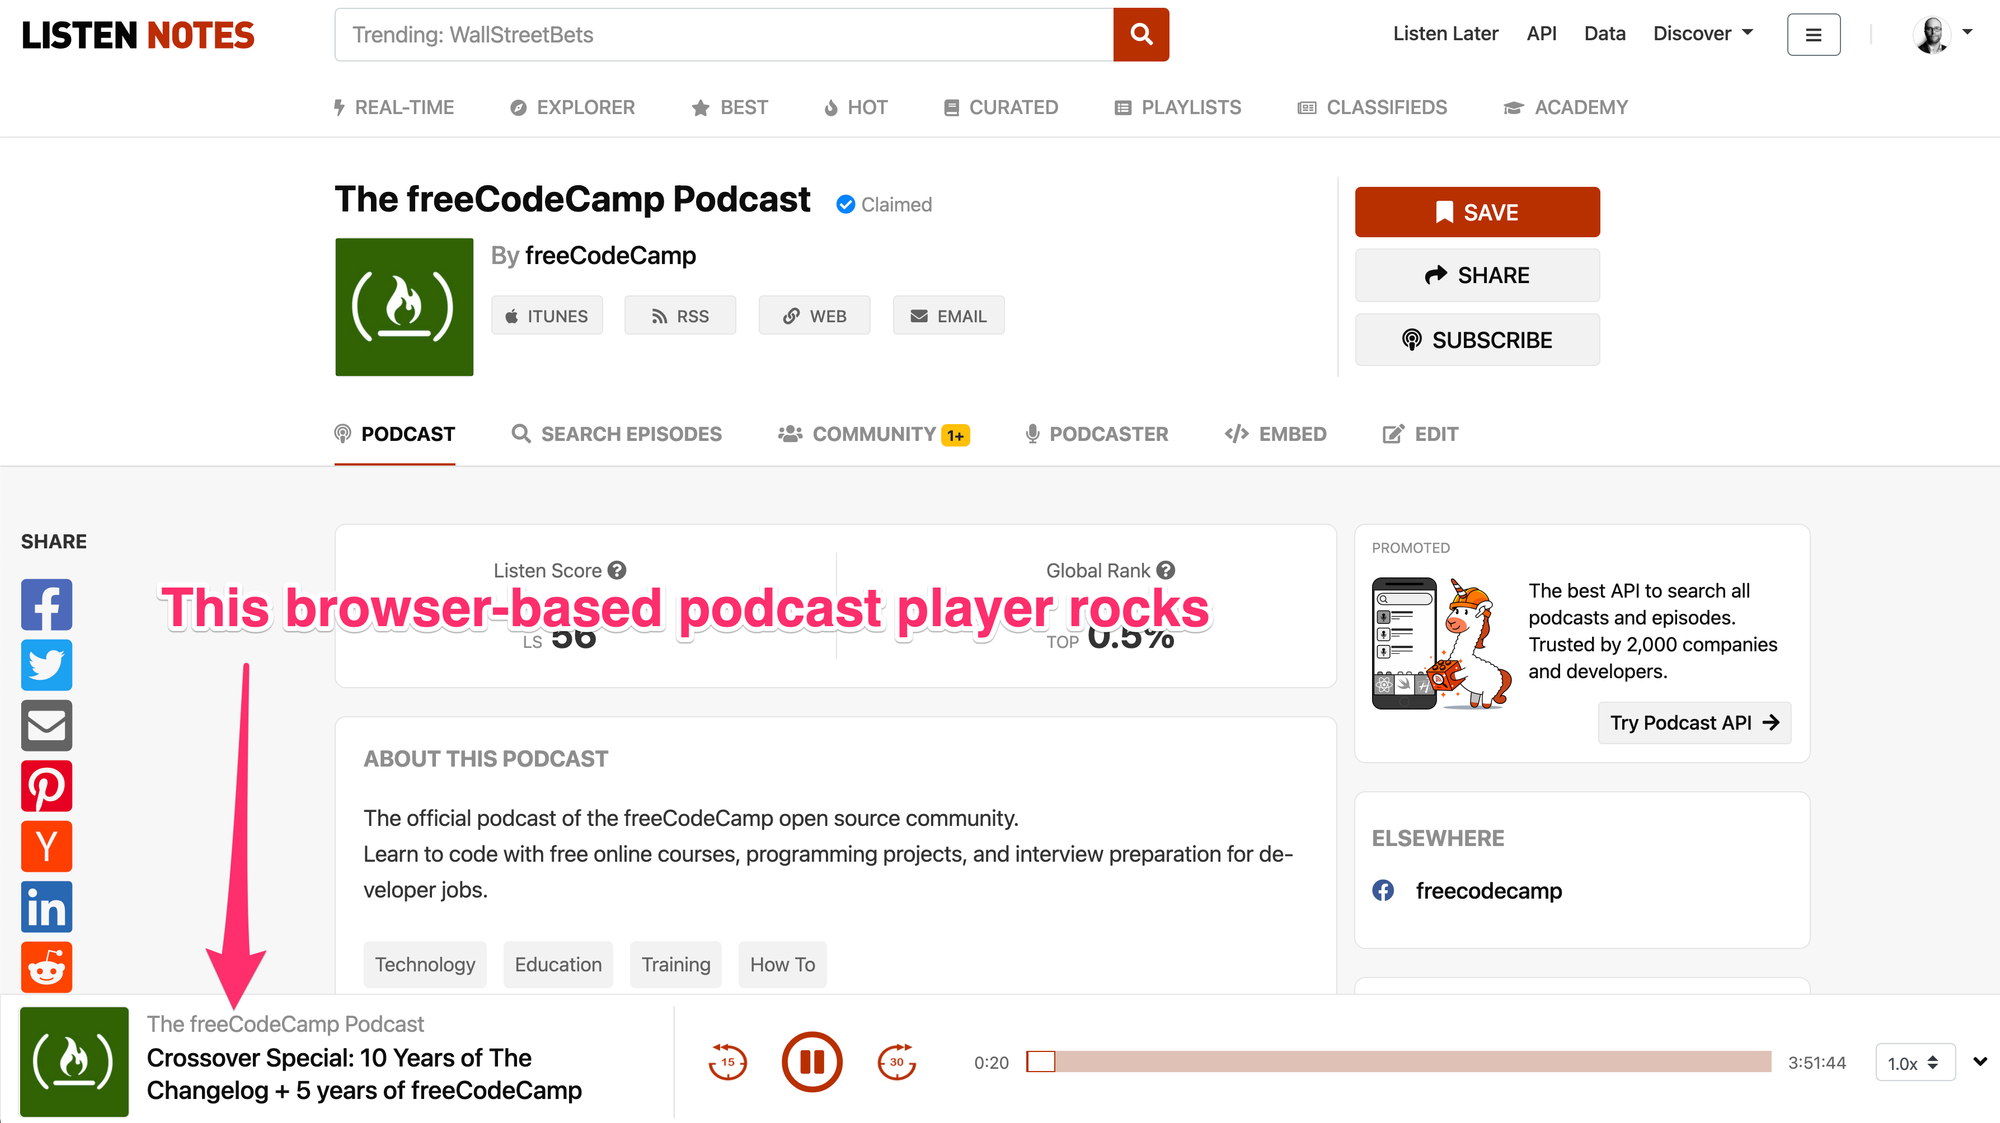 The_freeCodeCamp_Podcast_-_freeCodeCamp___Listen_Notes